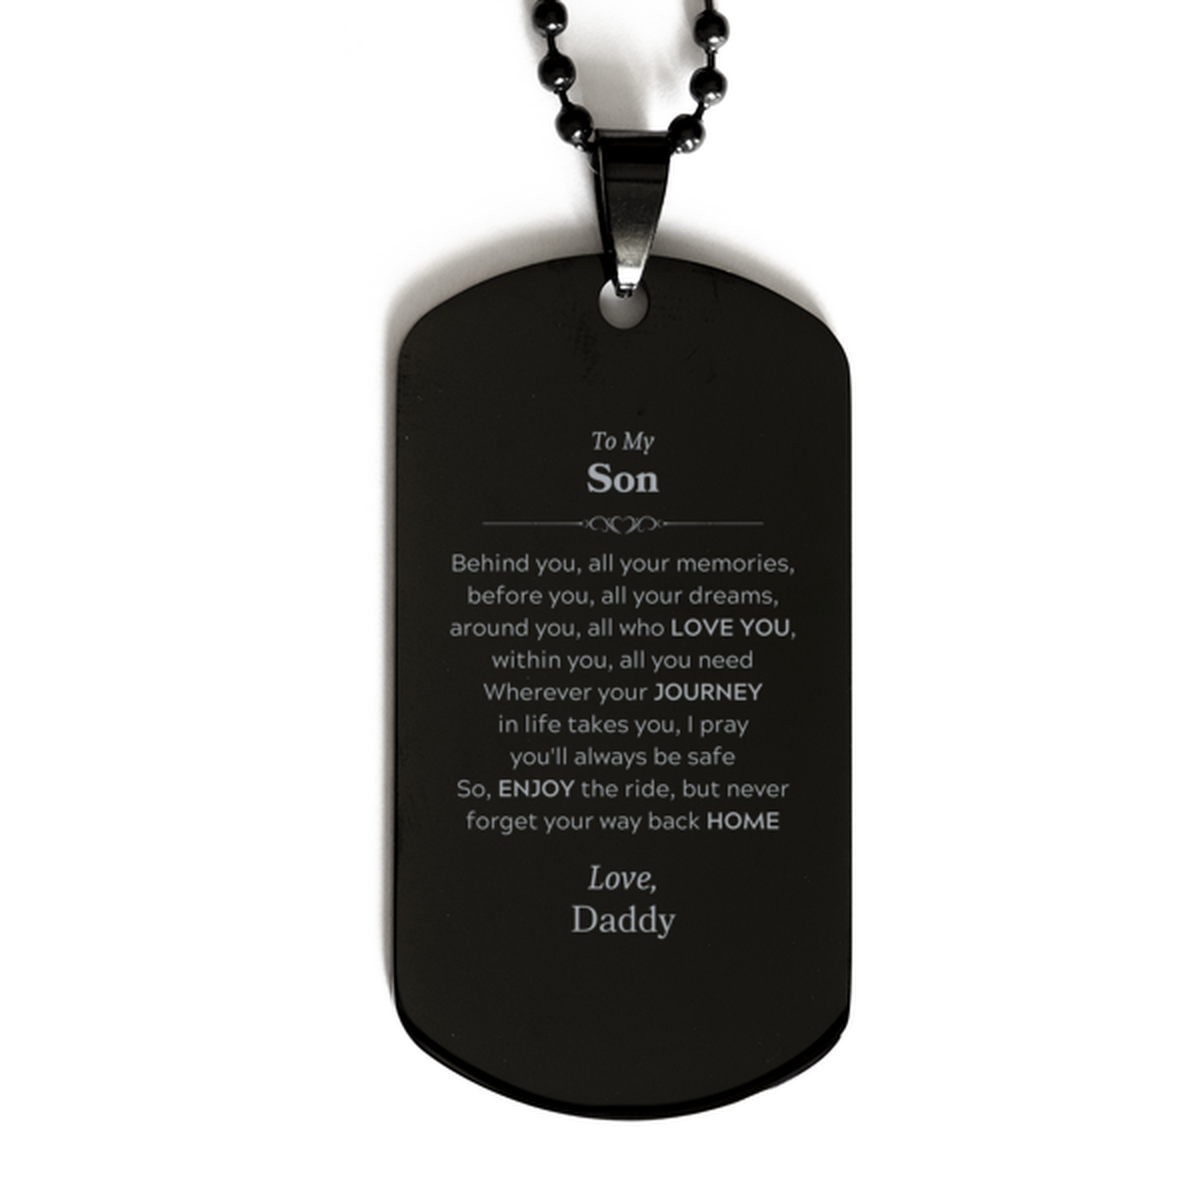 To My Son Graduation Gifts from Daddy, Son Black Dog Tag Christmas Birthday Gifts for Son Behind you, all your memories, before you, all your dreams. Love, Daddy